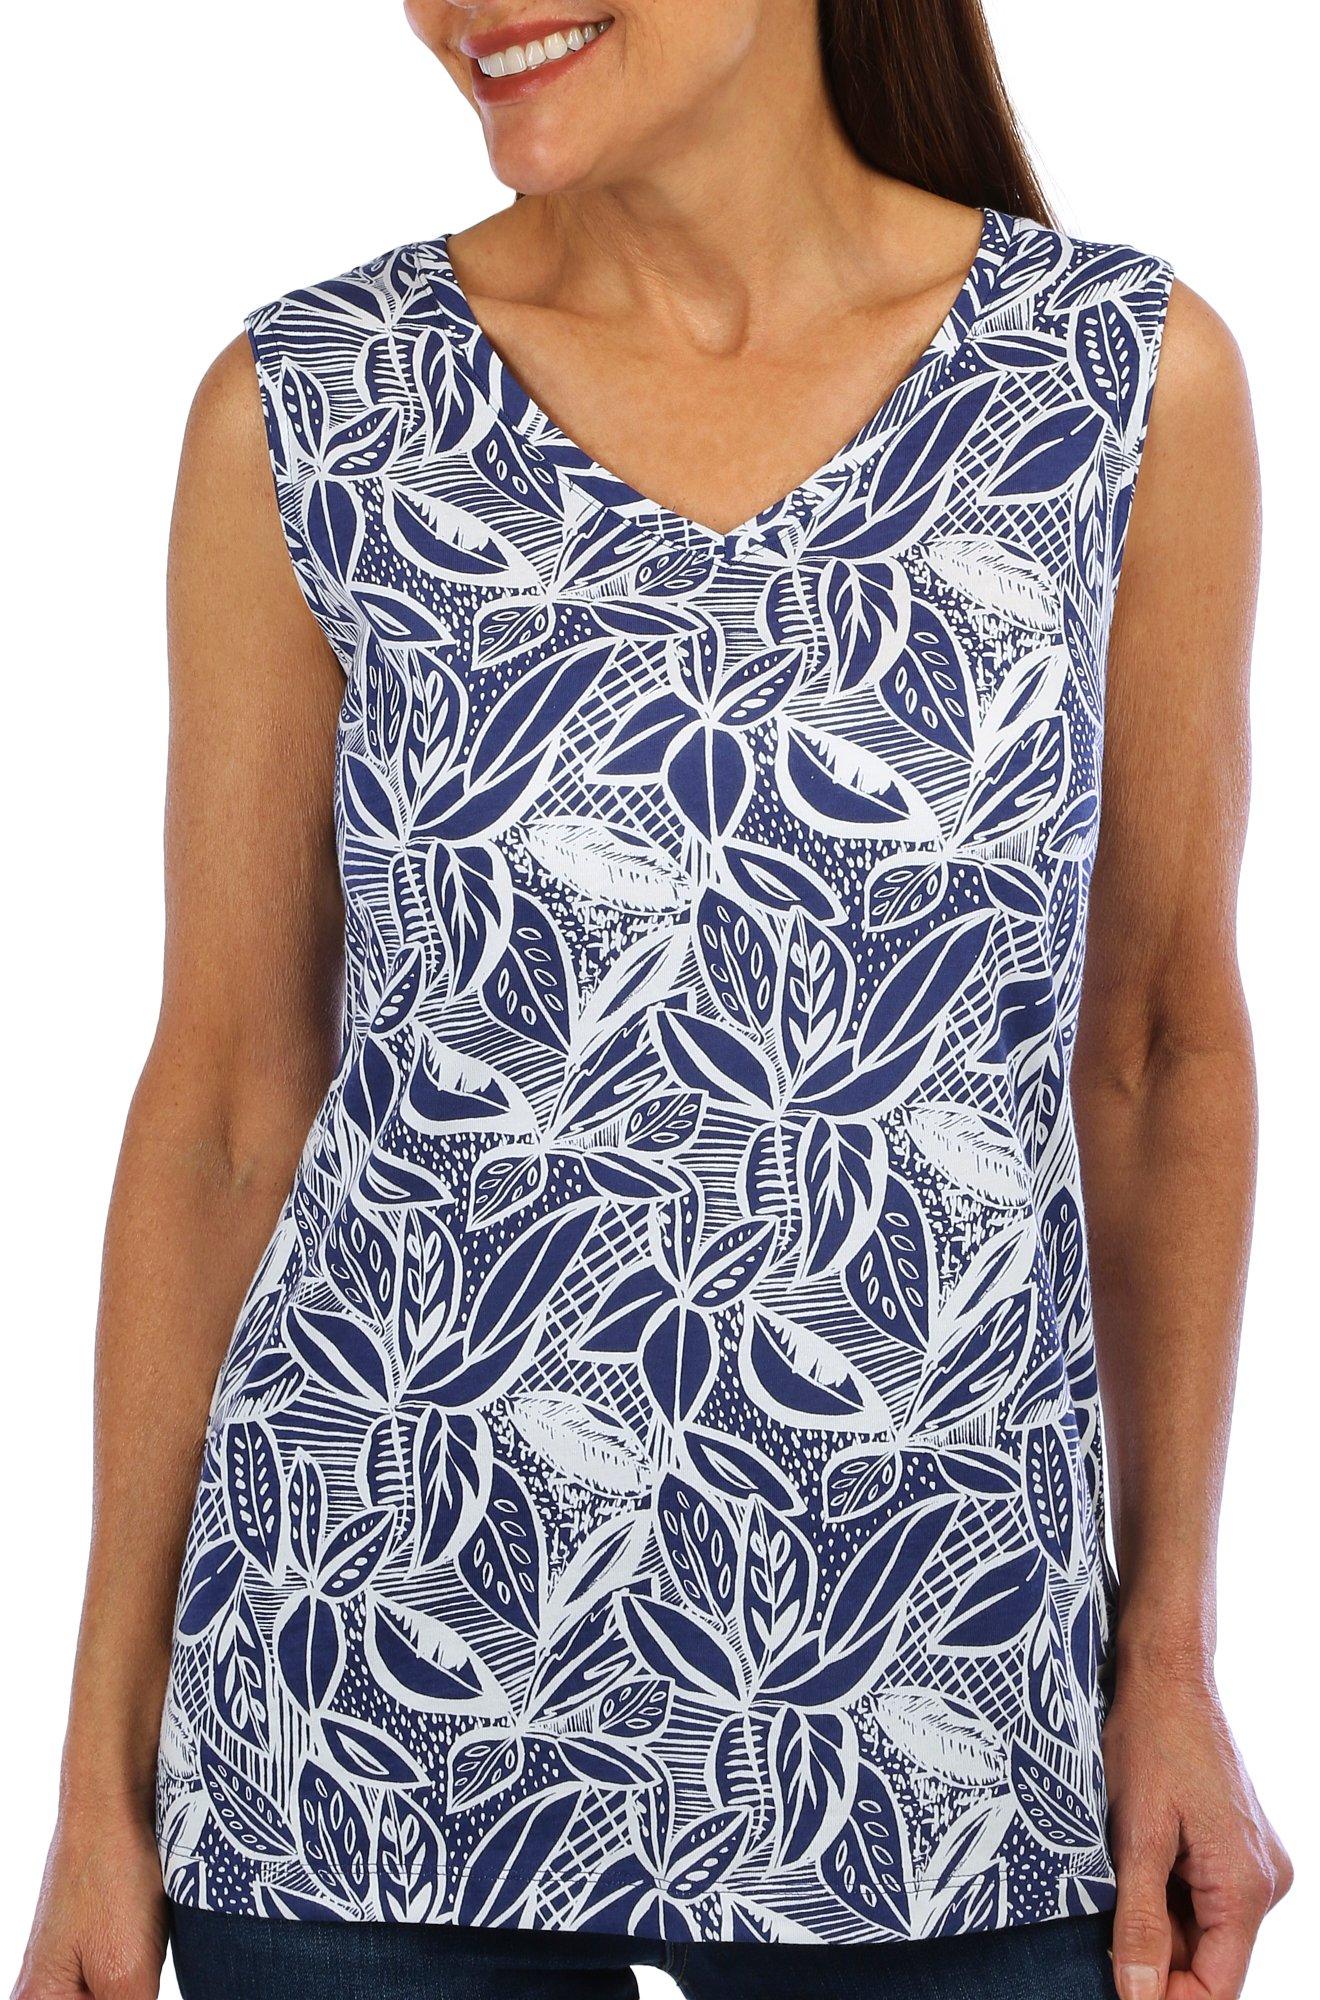 Coral Bay Womens Tropical Print Scoop Neck Tank Top